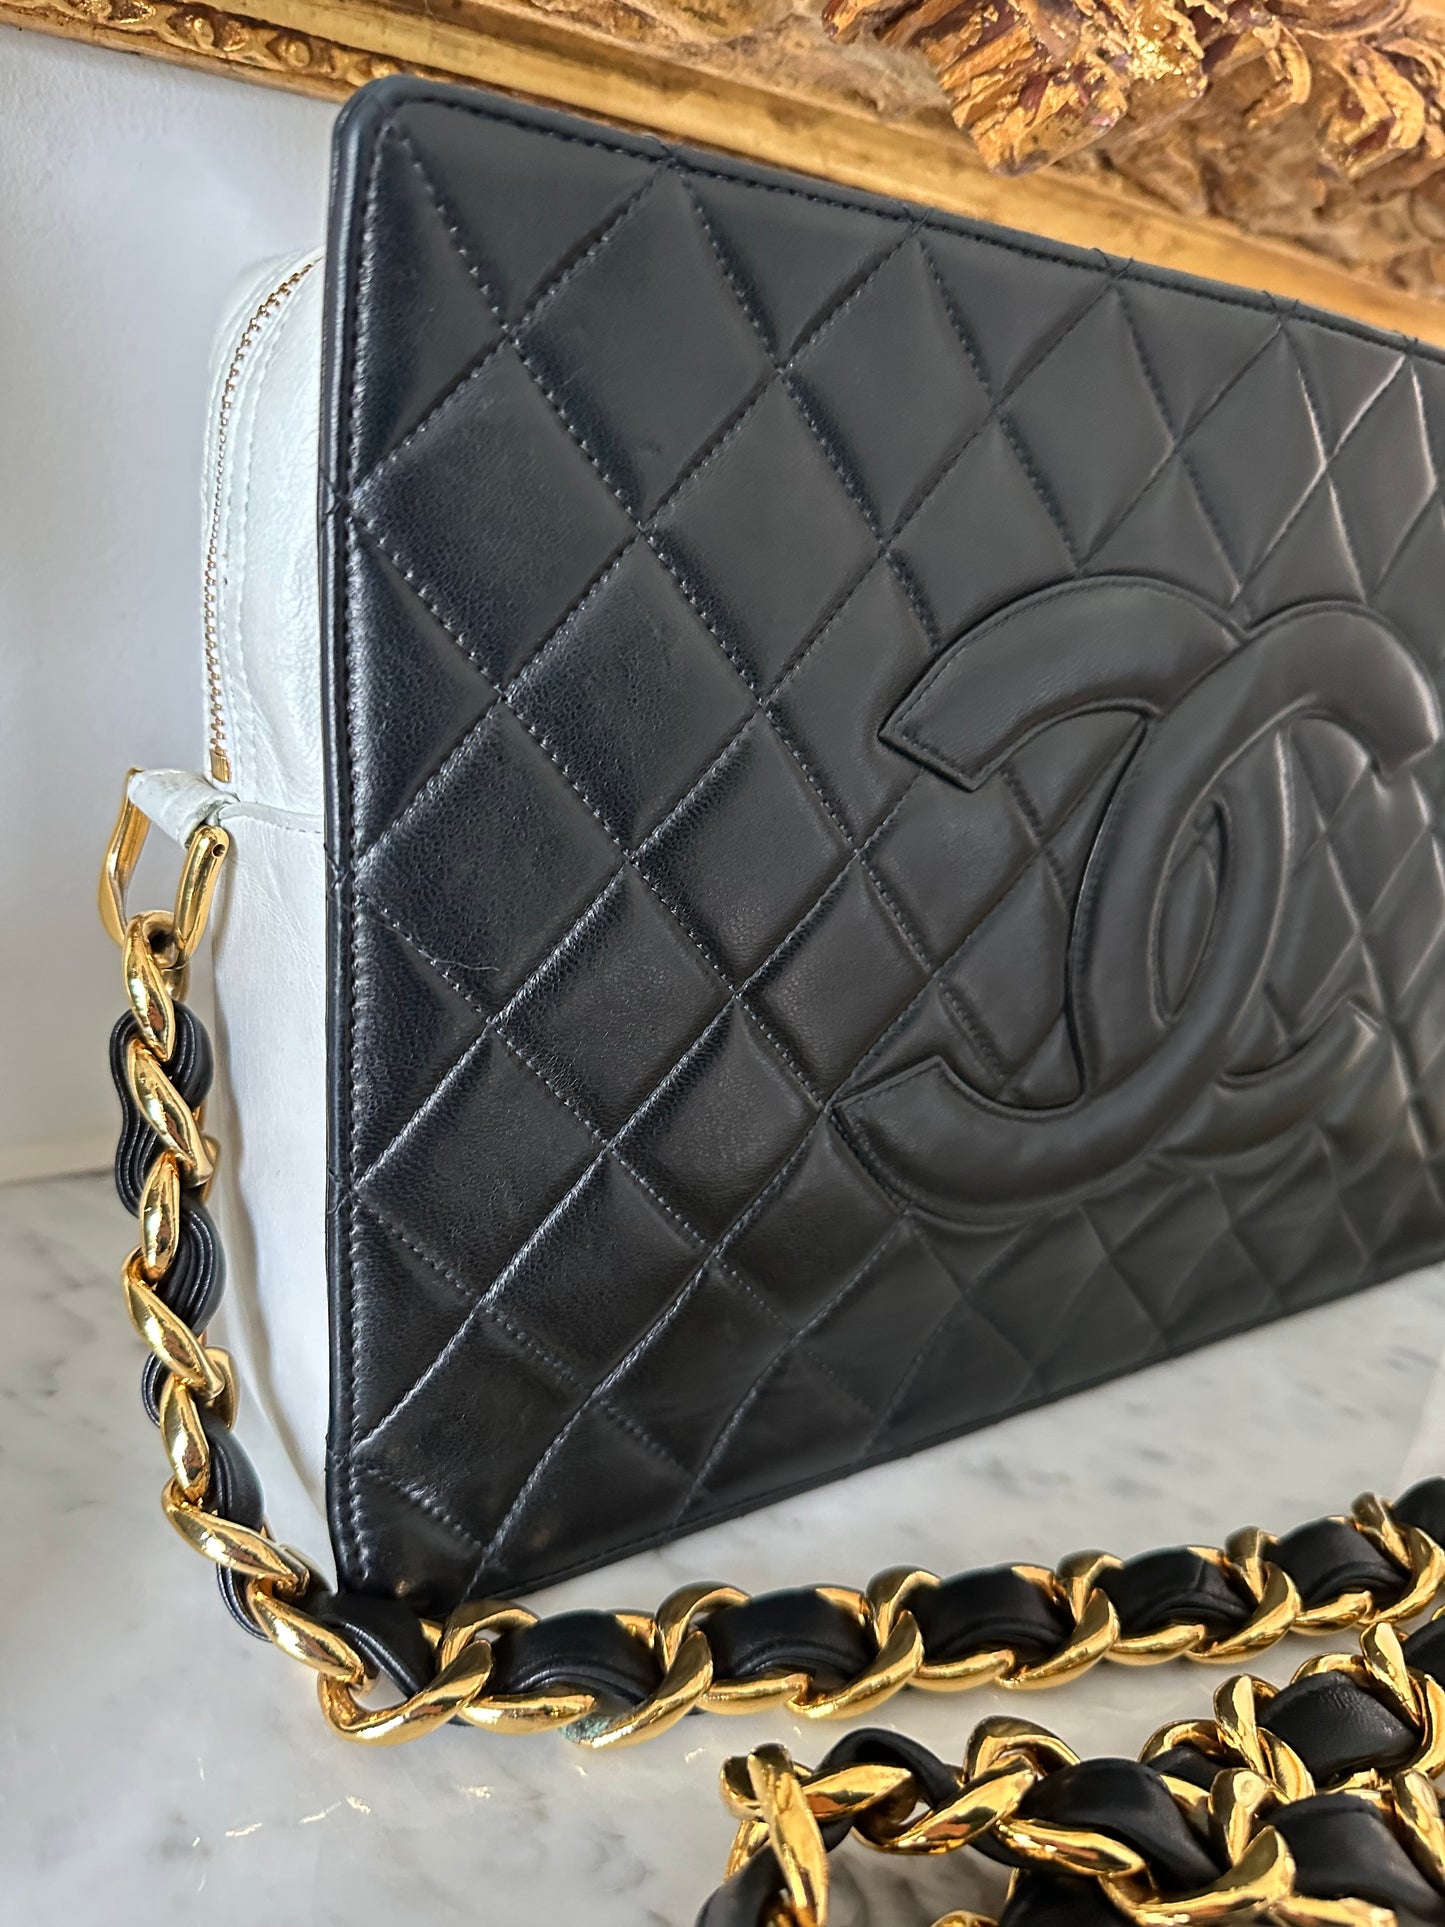 Chanel two-faced bag